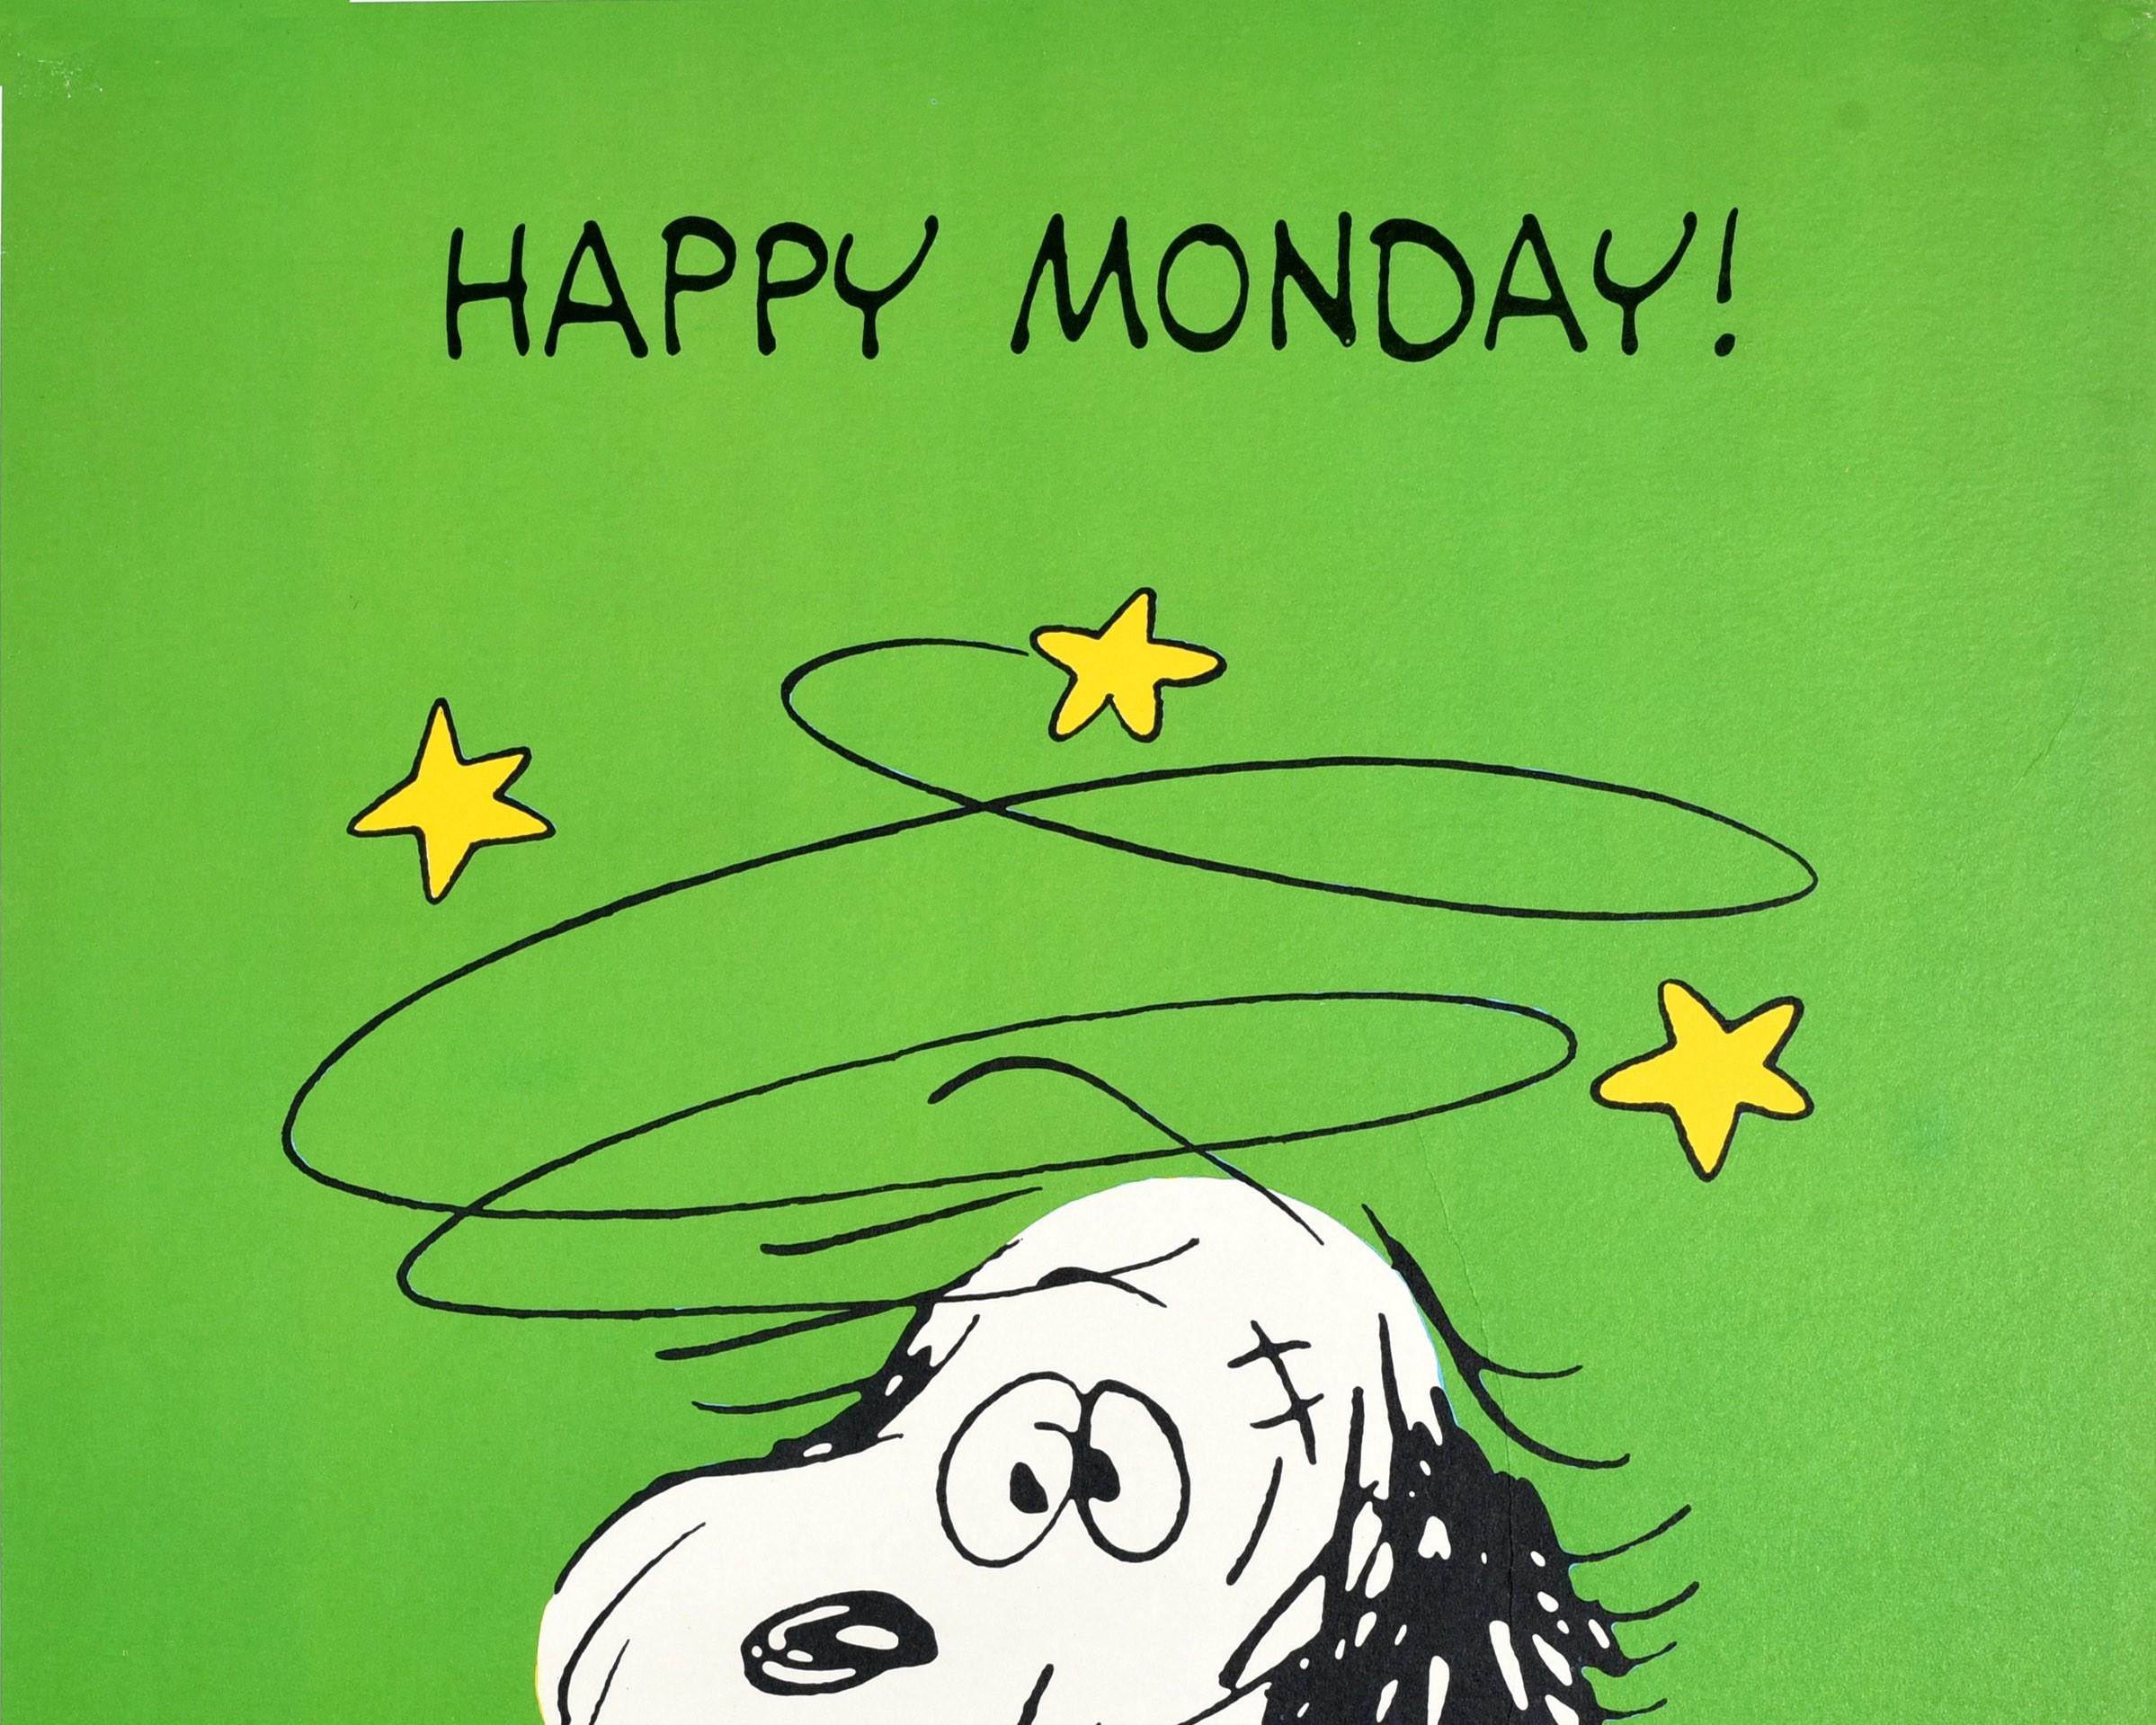 Original vintage poster featuring the iconic comic character Snoopy the Dog by the notable American cartoonist Charles M. Schulz (Charles Monroe Schulz; 1922-2000) - Happy Monday! Fun cartoon design depicting a dishevelled looking Snoopy sitting